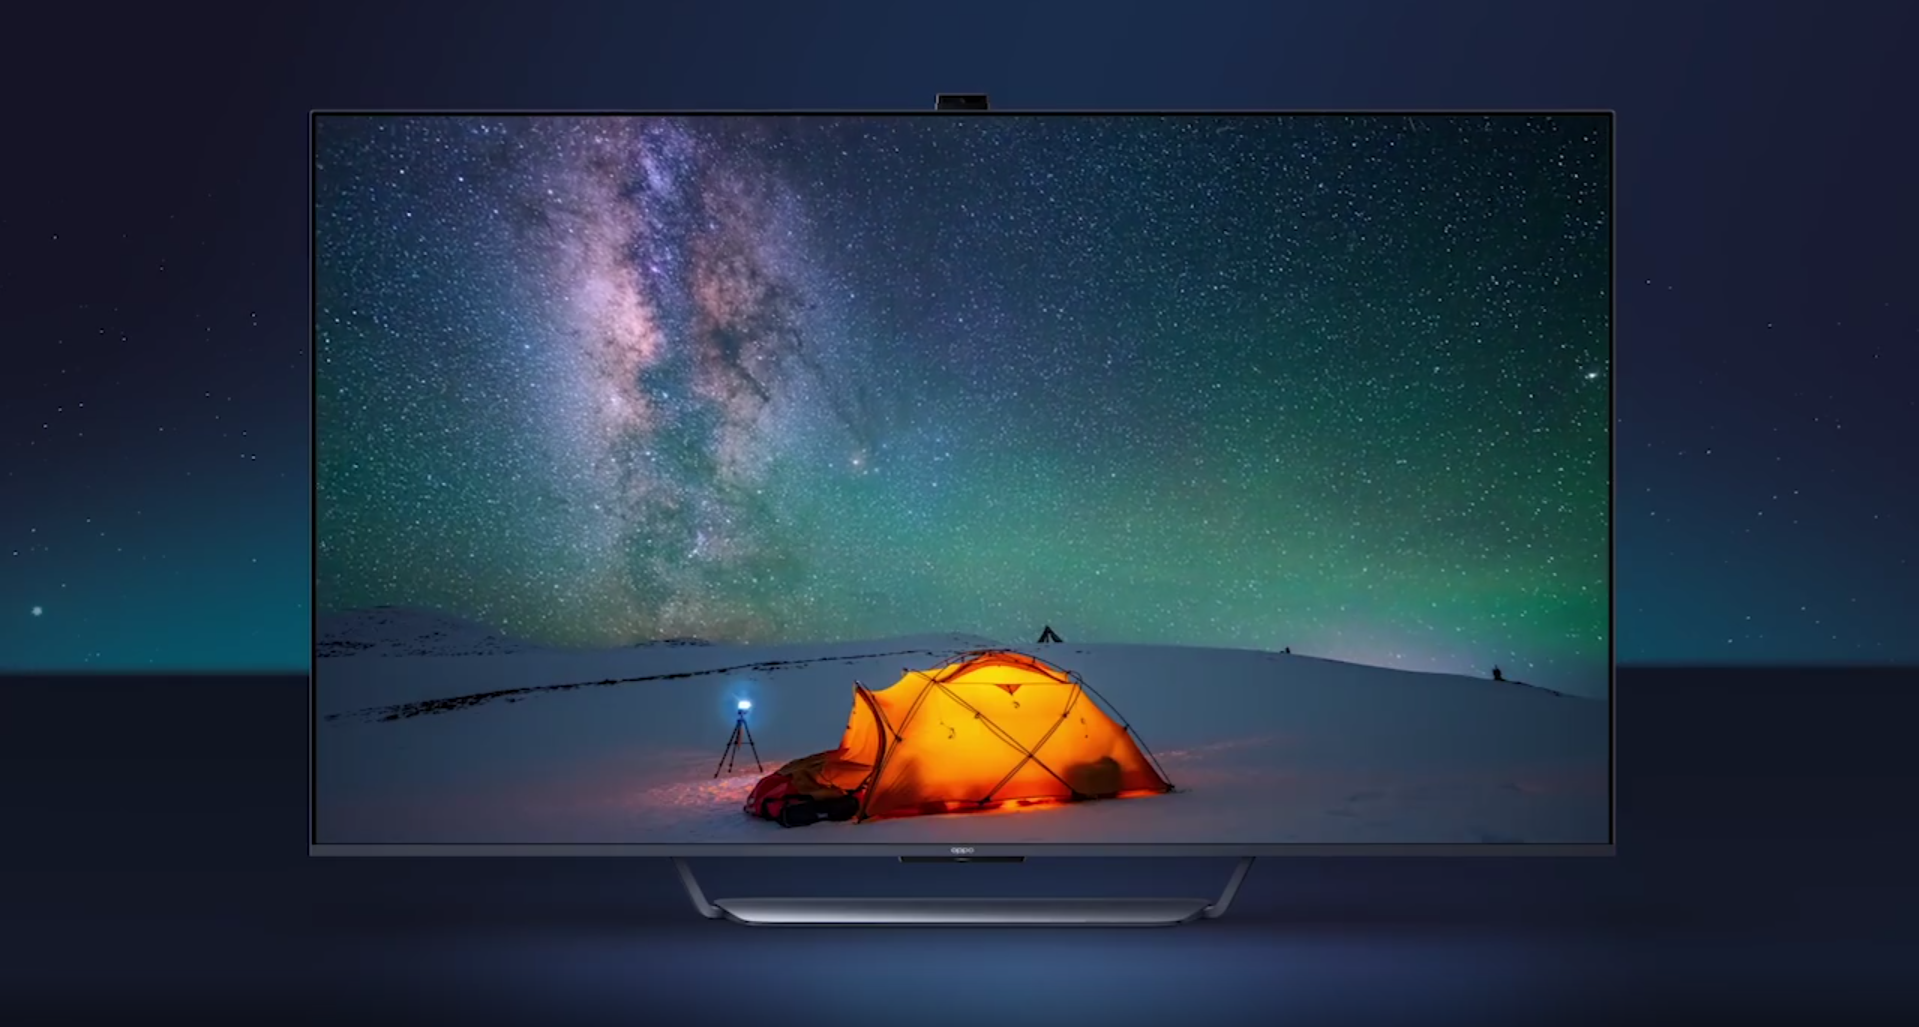 Here’s your first look at OPPO TV with pop-up camera